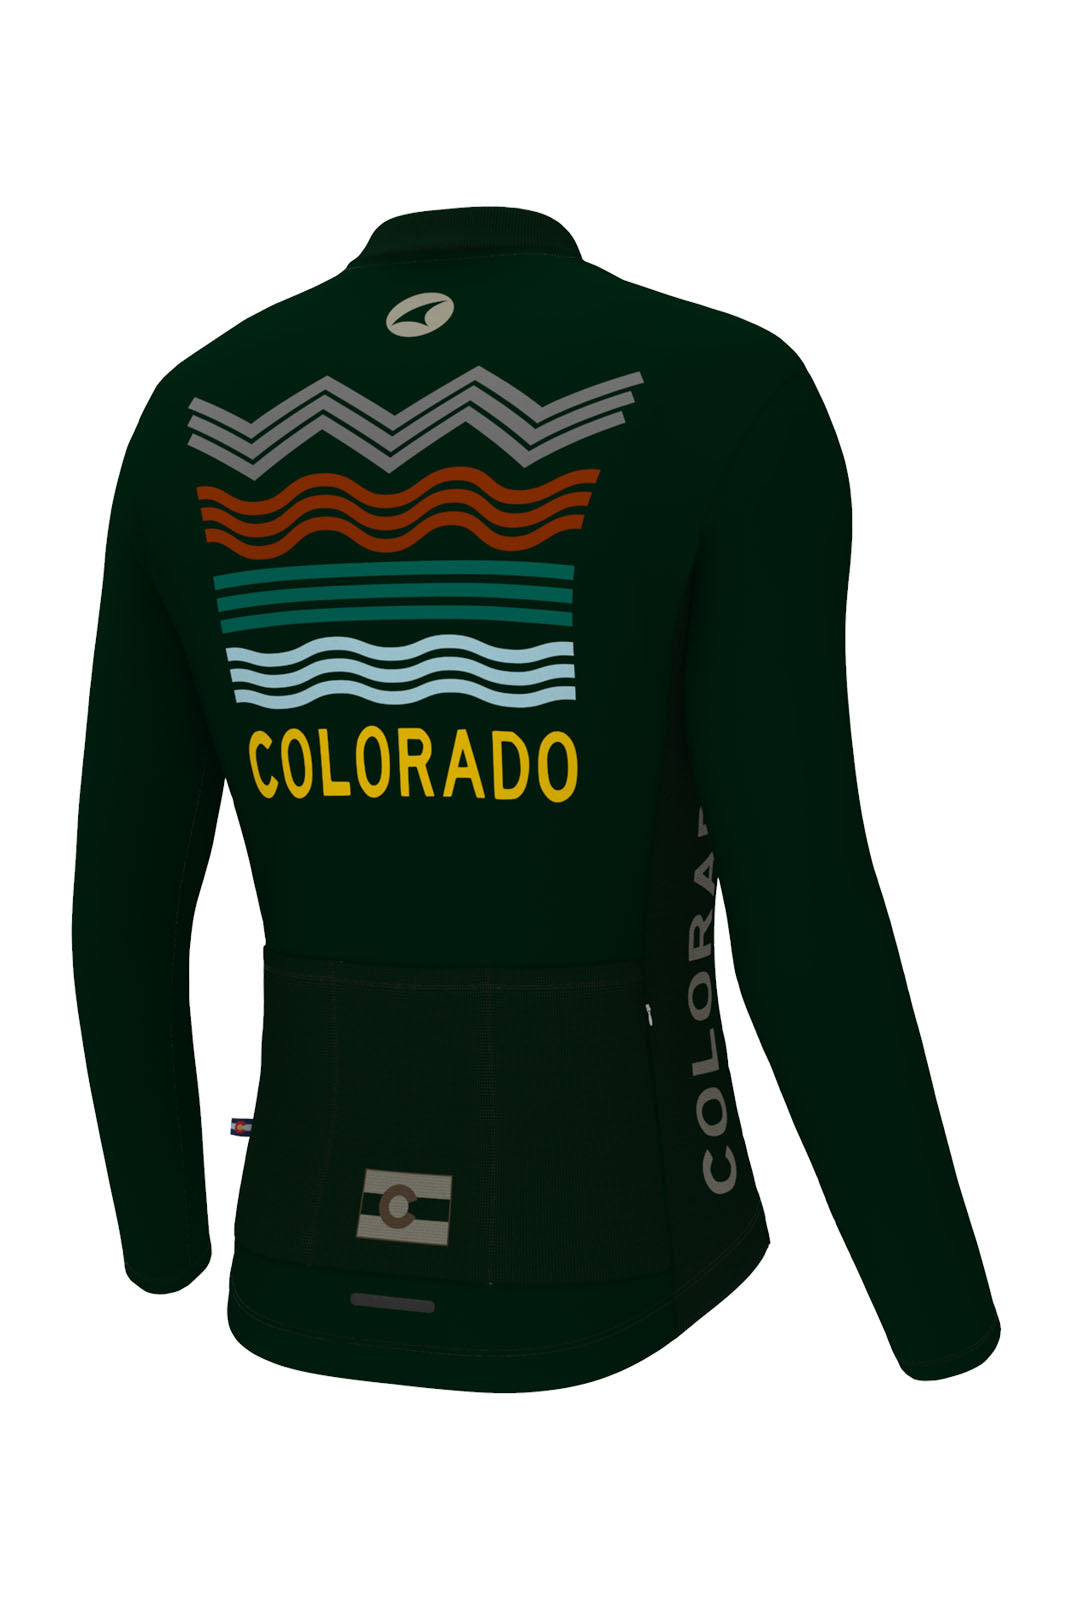 Men's Navy Blue Long Sleeve Colorado Cycling Jersey - Ascent Back View